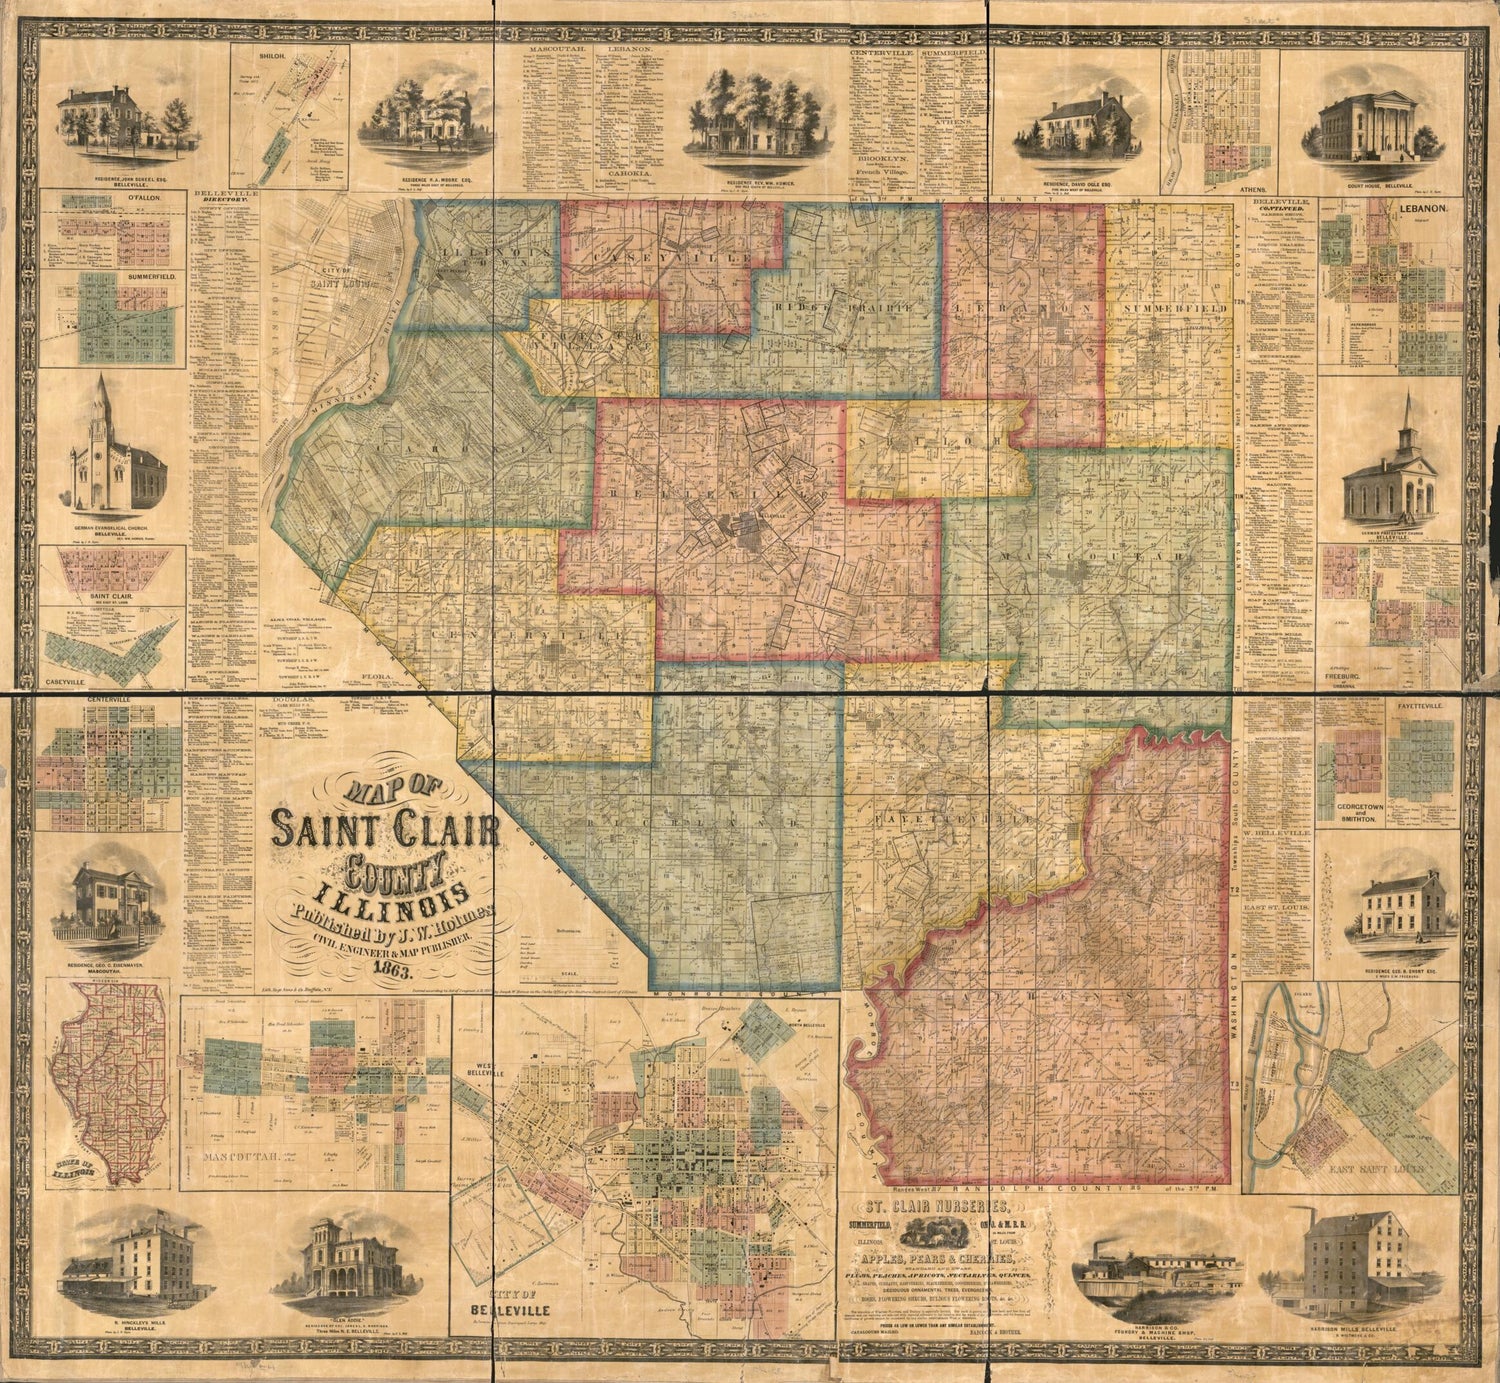 This old map of Map of Saint Clair County, Illinois from 1863 was created by J. W. (Joseph W.) Holmes in 1863